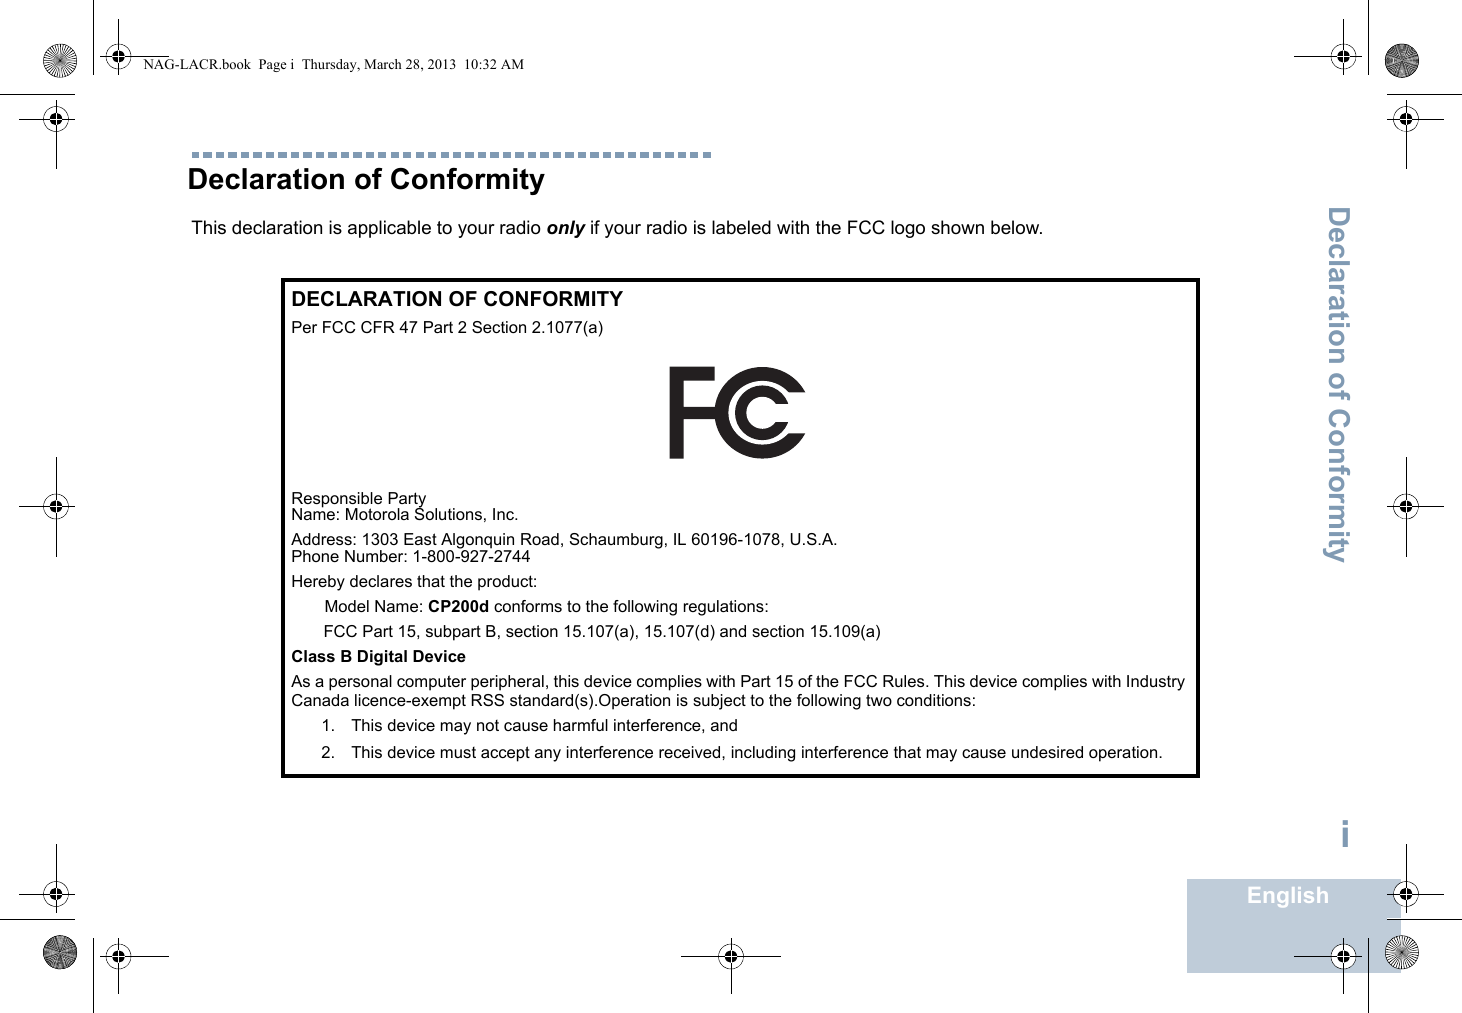 Declaration of ConformityEnglishiDeclaration of ConformityThis declaration is applicable to your radio only if your radio is labeled with the FCC logo shown below.DECLARATION OF CONFORMITYPer FCC CFR 47 Part 2 Section 2.1077(a)Responsible Party Name: Motorola Solutions, Inc.Address: 1303 East Algonquin Road, Schaumburg, IL 60196-1078, U.S.A.Phone Number: 1-800-927-2744Hereby declares that the product:Model Name: CP200d conforms to the following regulations:FCC Part 15, subpart B, section 15.107(a), 15.107(d) and section 15.109(a)Class B Digital DeviceAs a personal computer peripheral, this device complies with Part 15 of the FCC Rules. This device complies with Industry Canada licence-exempt RSS standard(s).Operation is subject to the following two conditions:1. This device may not cause harmful interference, and 2. This device must accept any interference received, including interference that may cause undesired operation.NAG-LACR.book  Page i  Thursday, March 28, 2013  10:32 AM